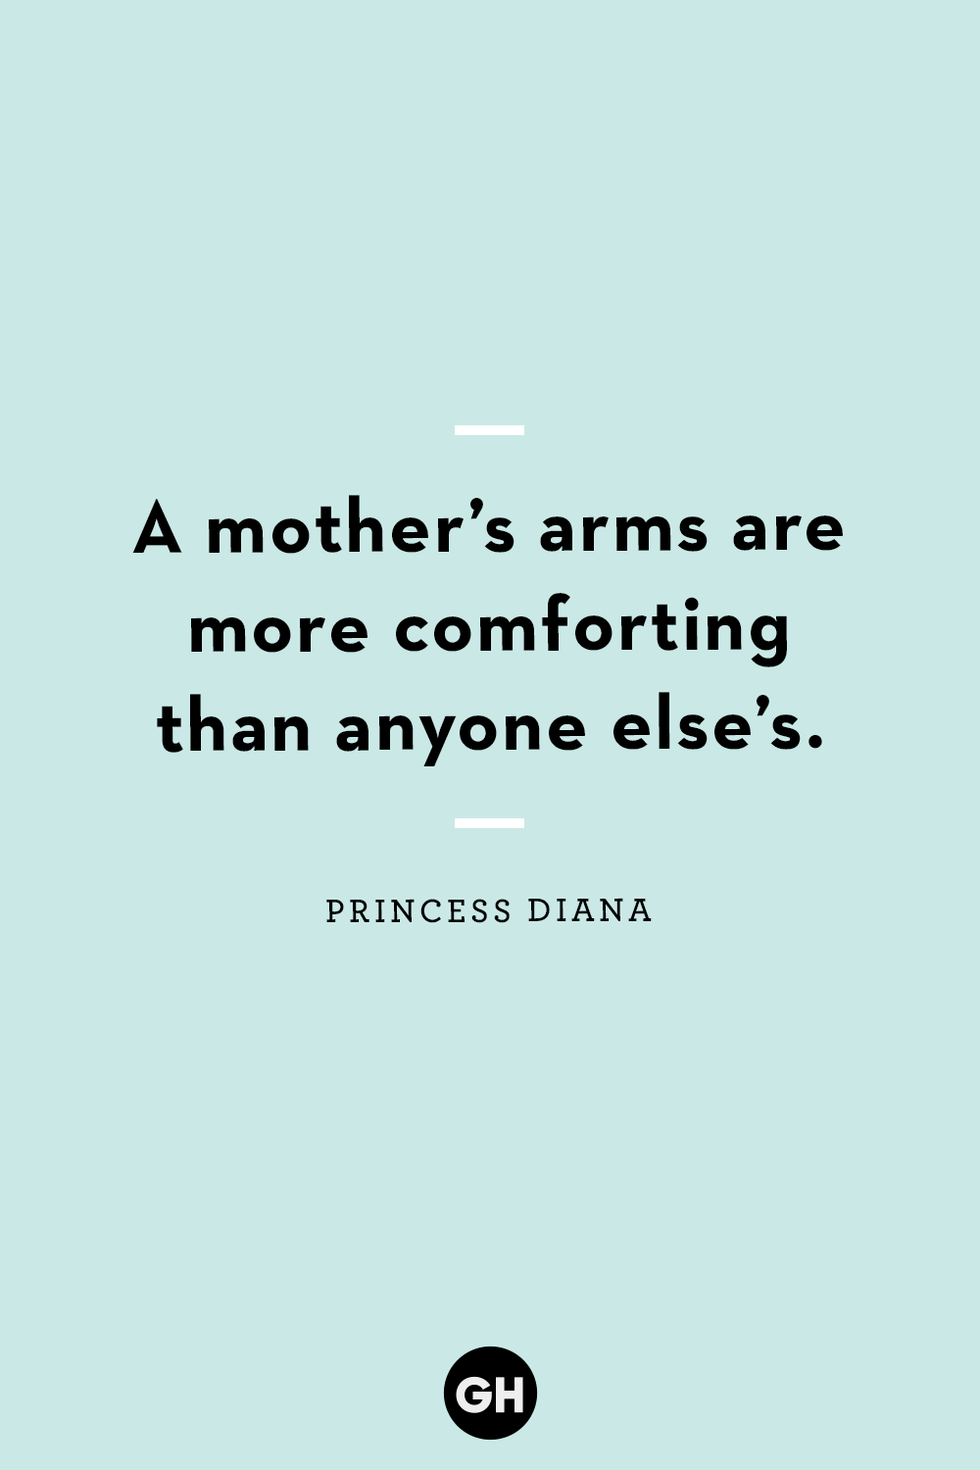 130+ Encouraging & Beautiful Quotes for a New Mother